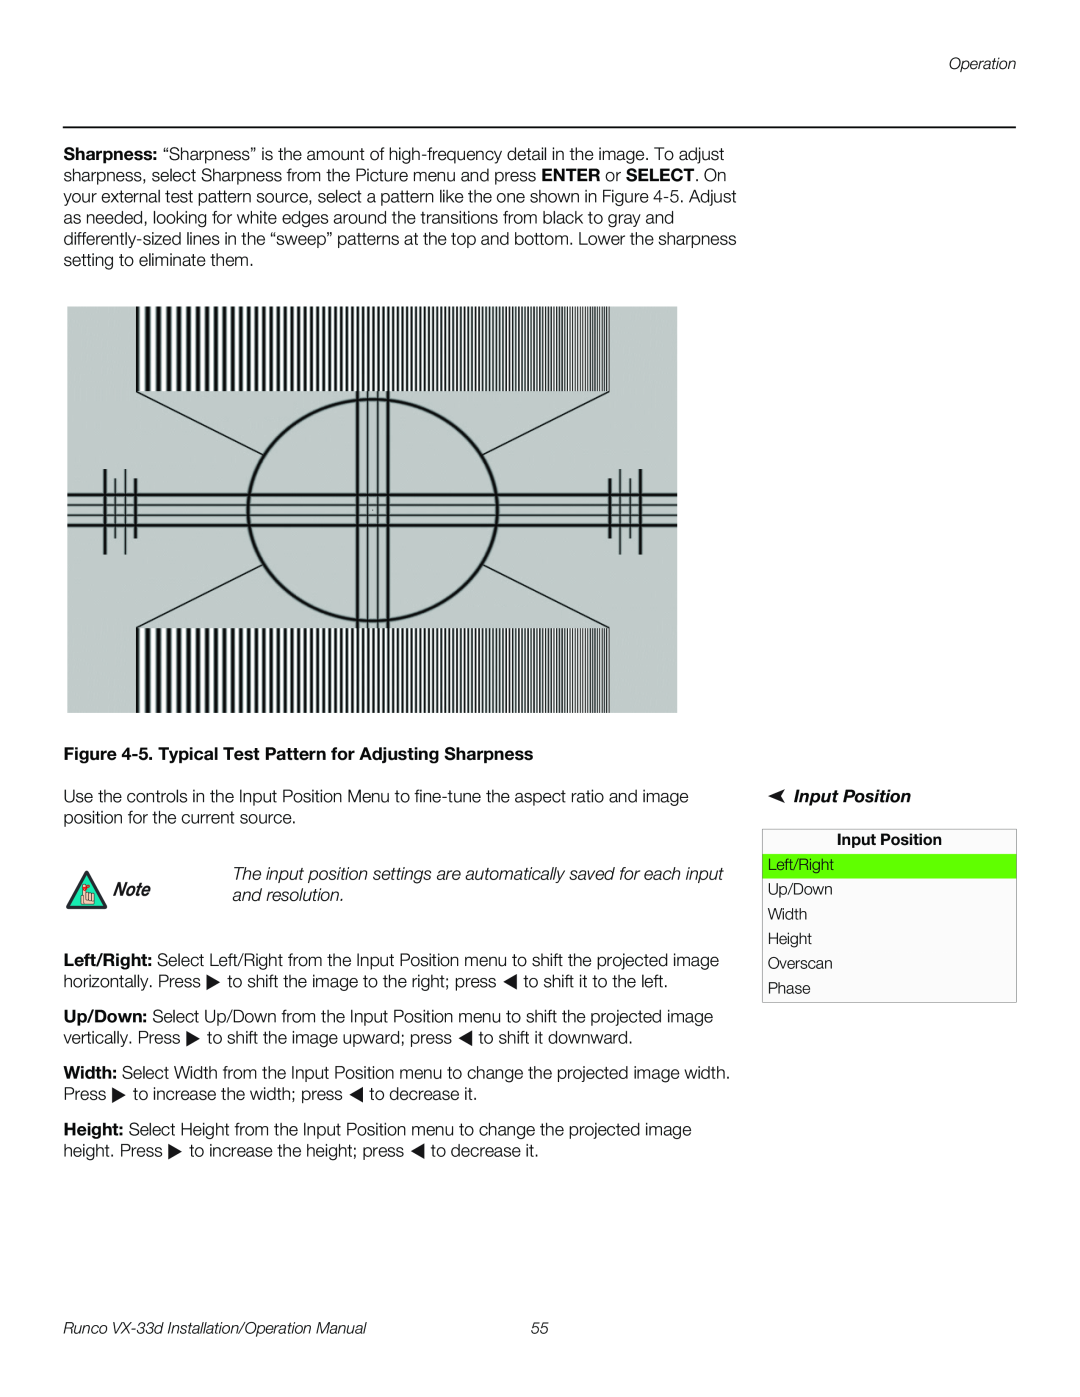 Runco VX-33D operation manual 5. Typical Test Pattern for Adjusting Sharpness, and resolution, Input Position 